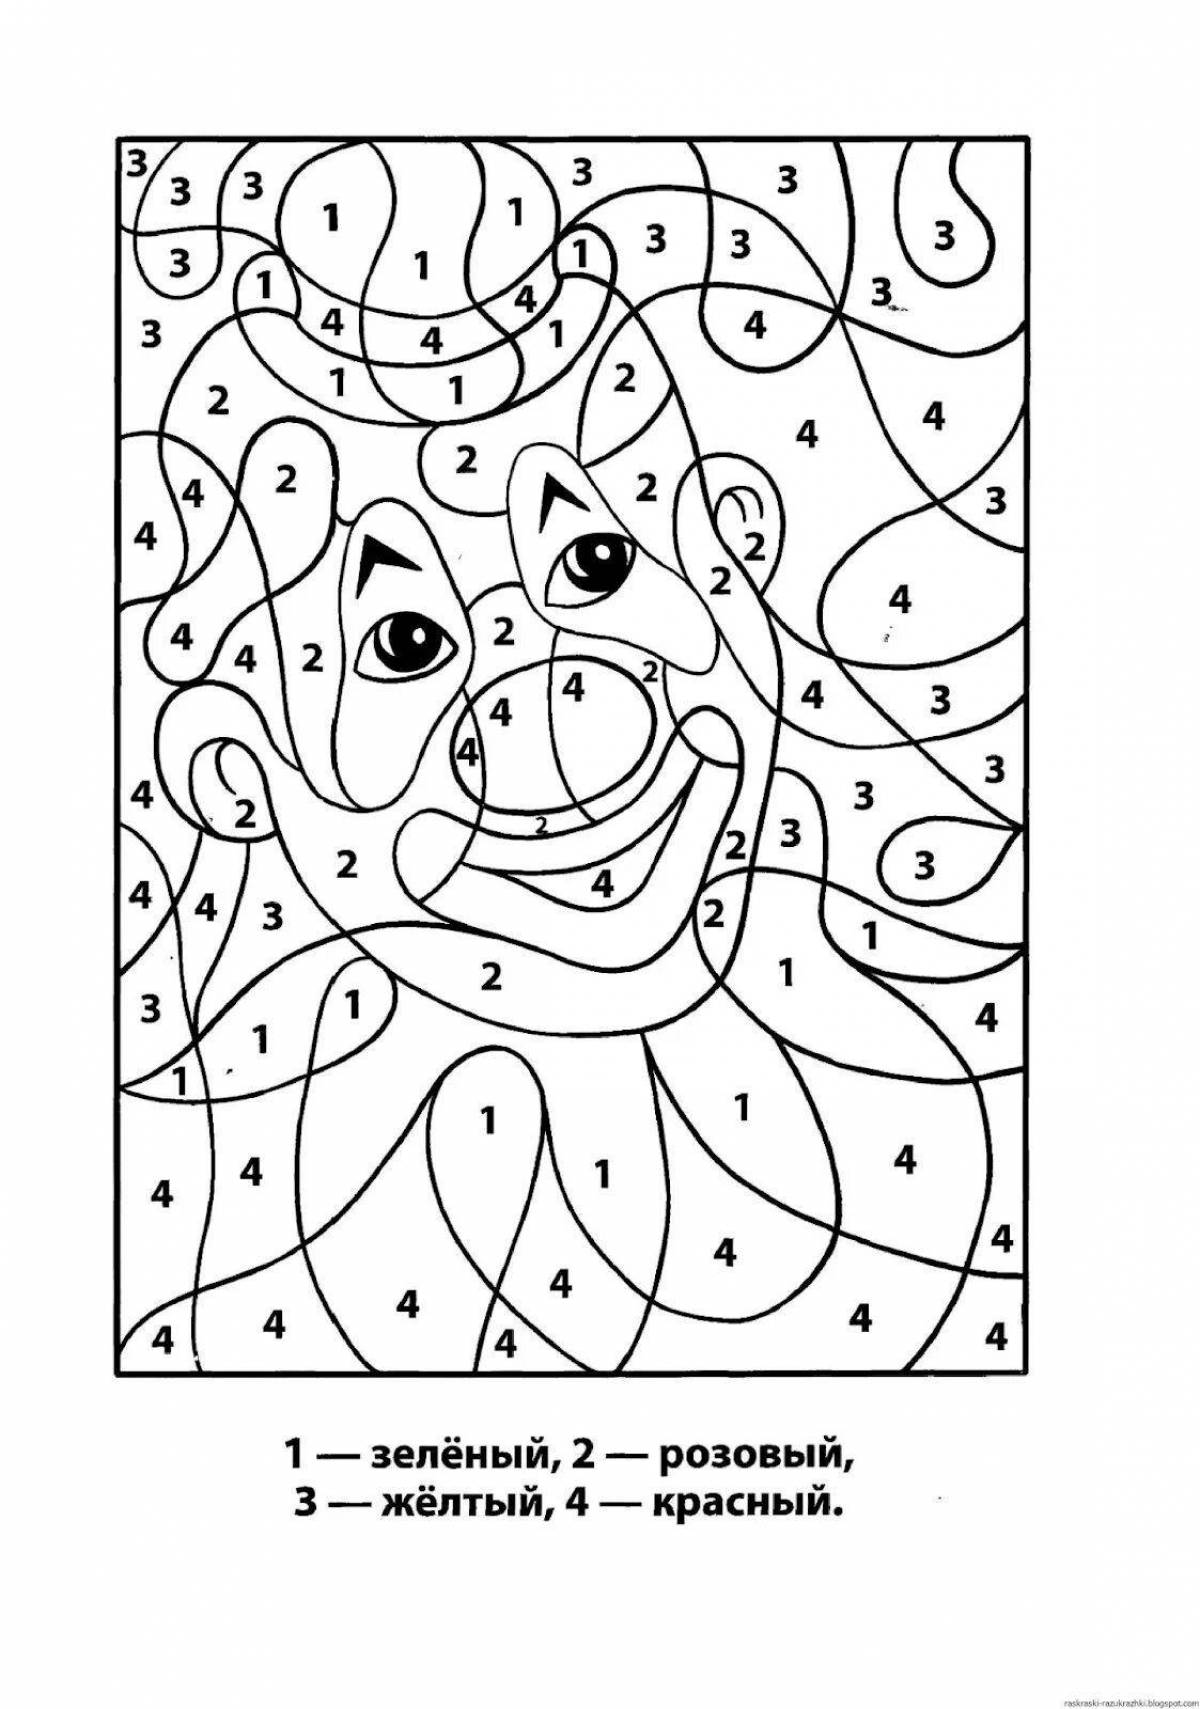 Fun coloring book for 7 year olds